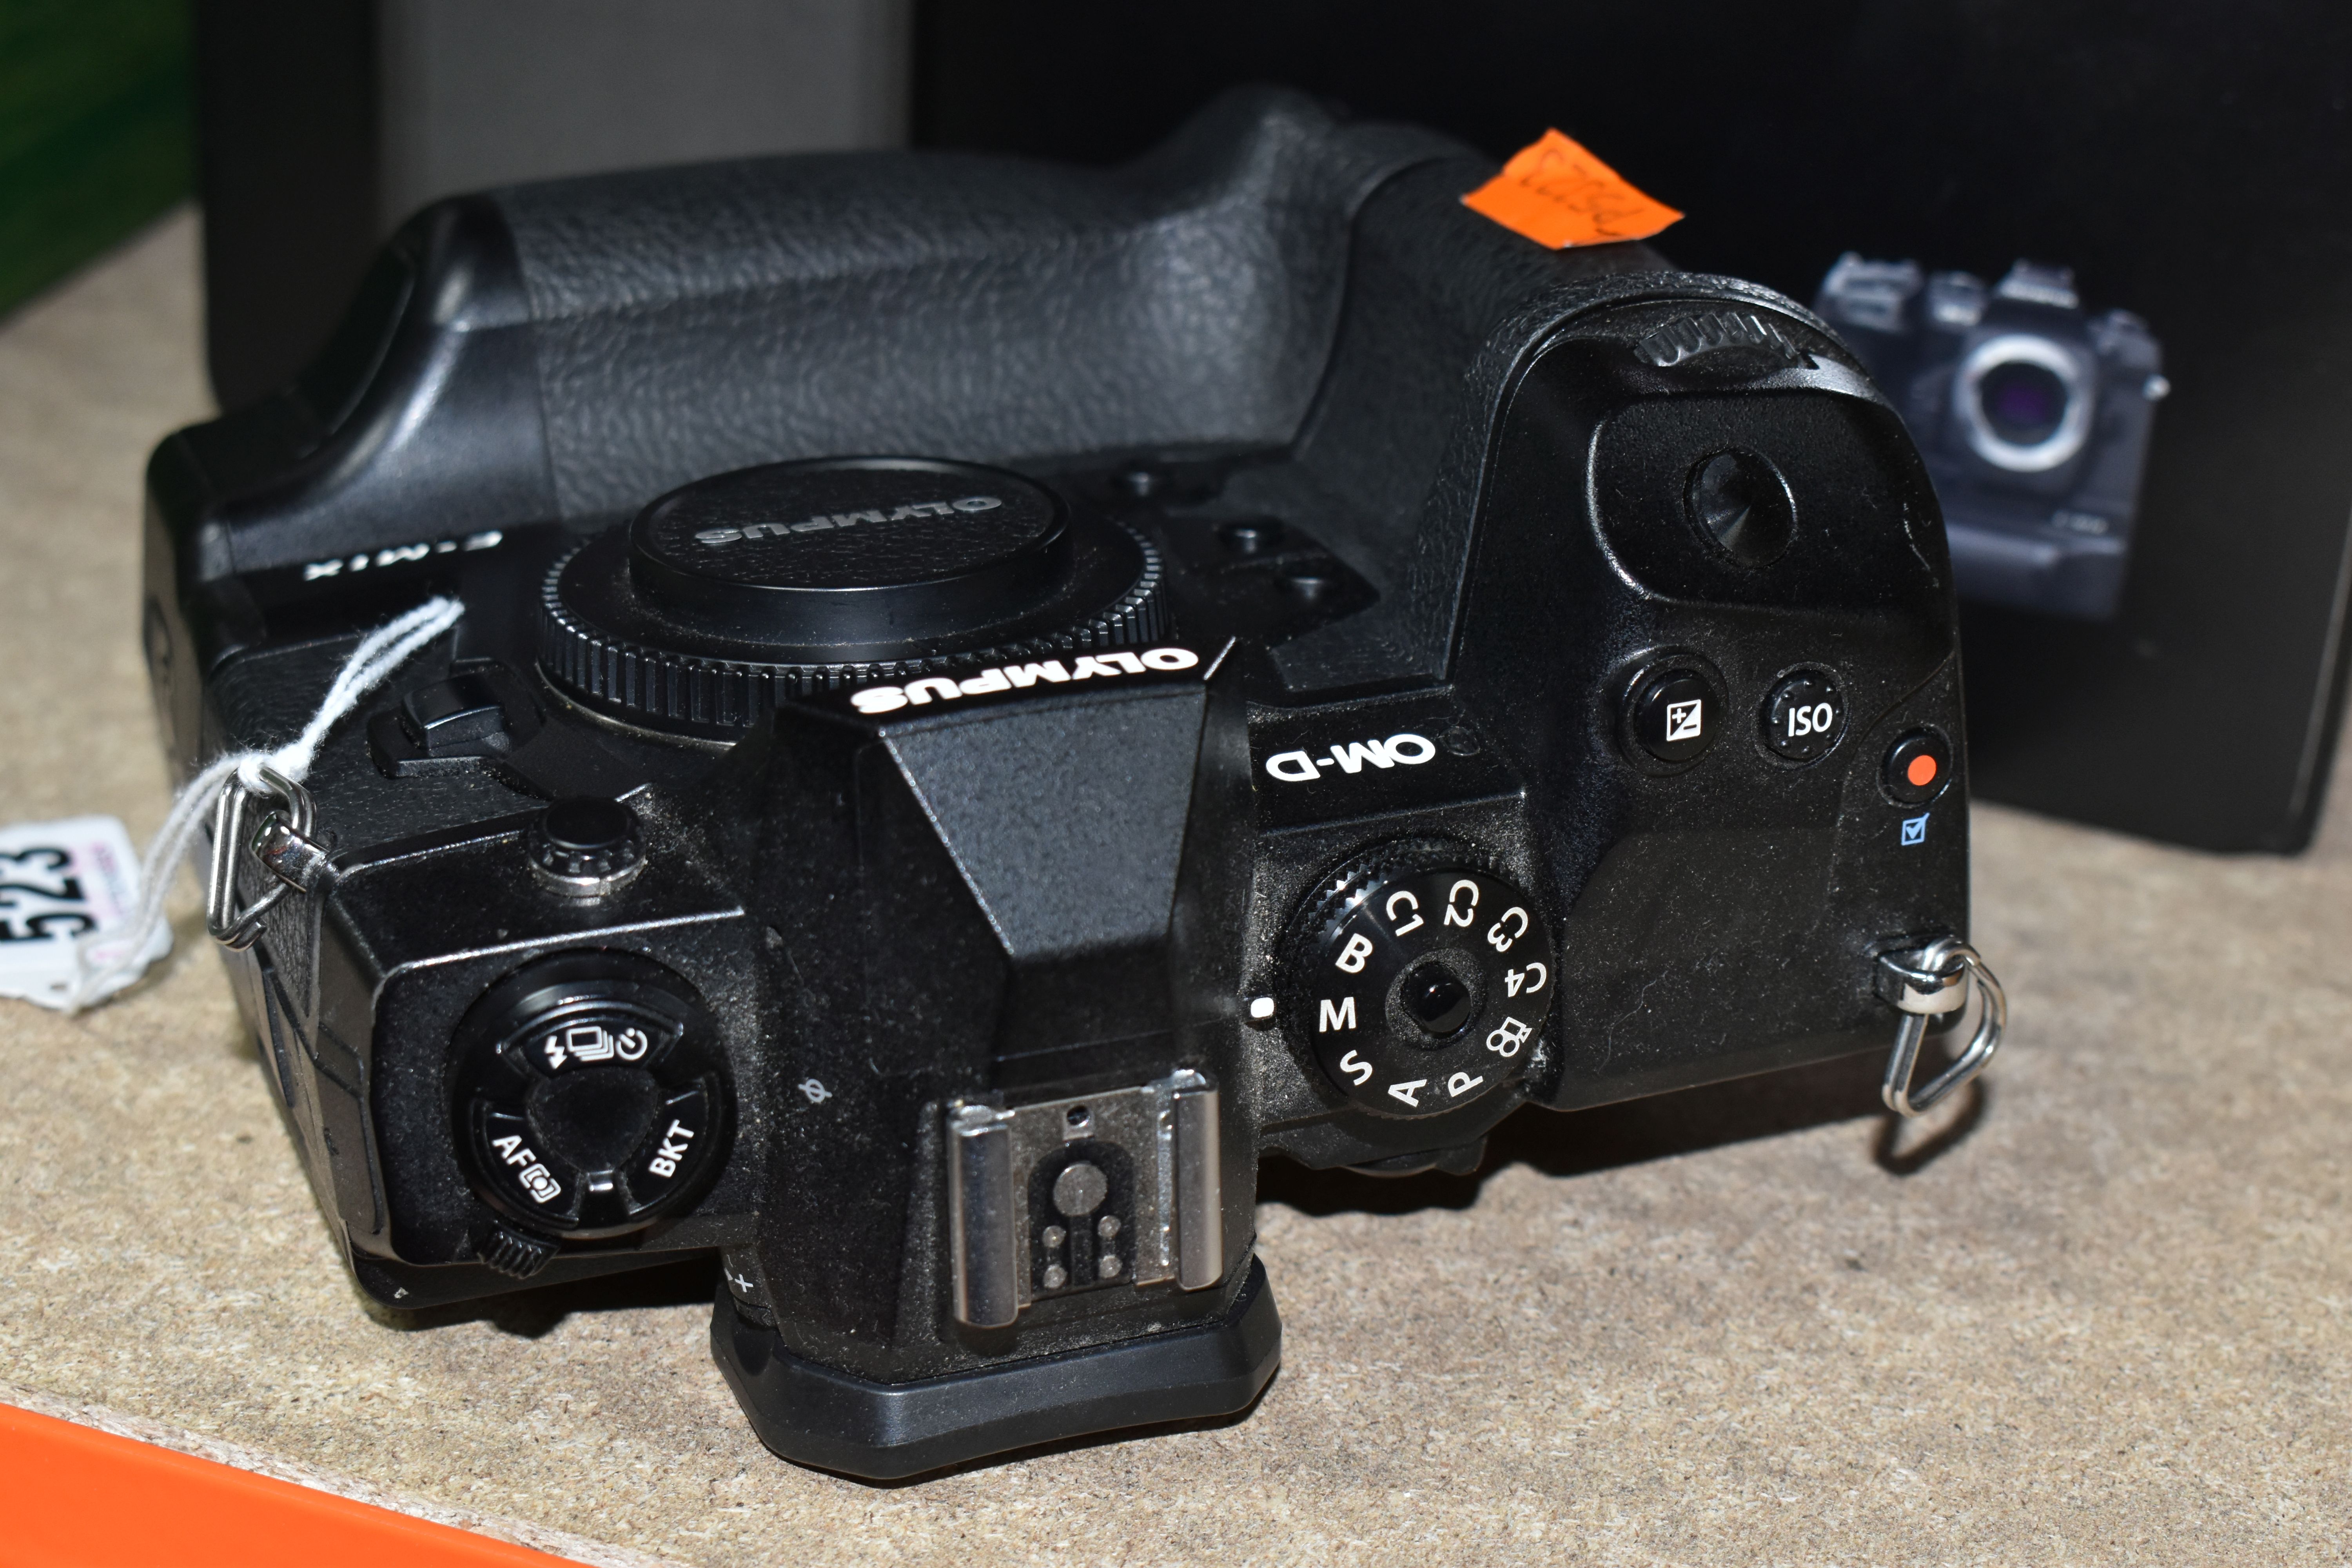 AN OLYMPUS OM-D E-M1X MIRRORLESS 4/3 CAMERA BODY, complete with battery charger (no UK power cable), - Image 3 of 4